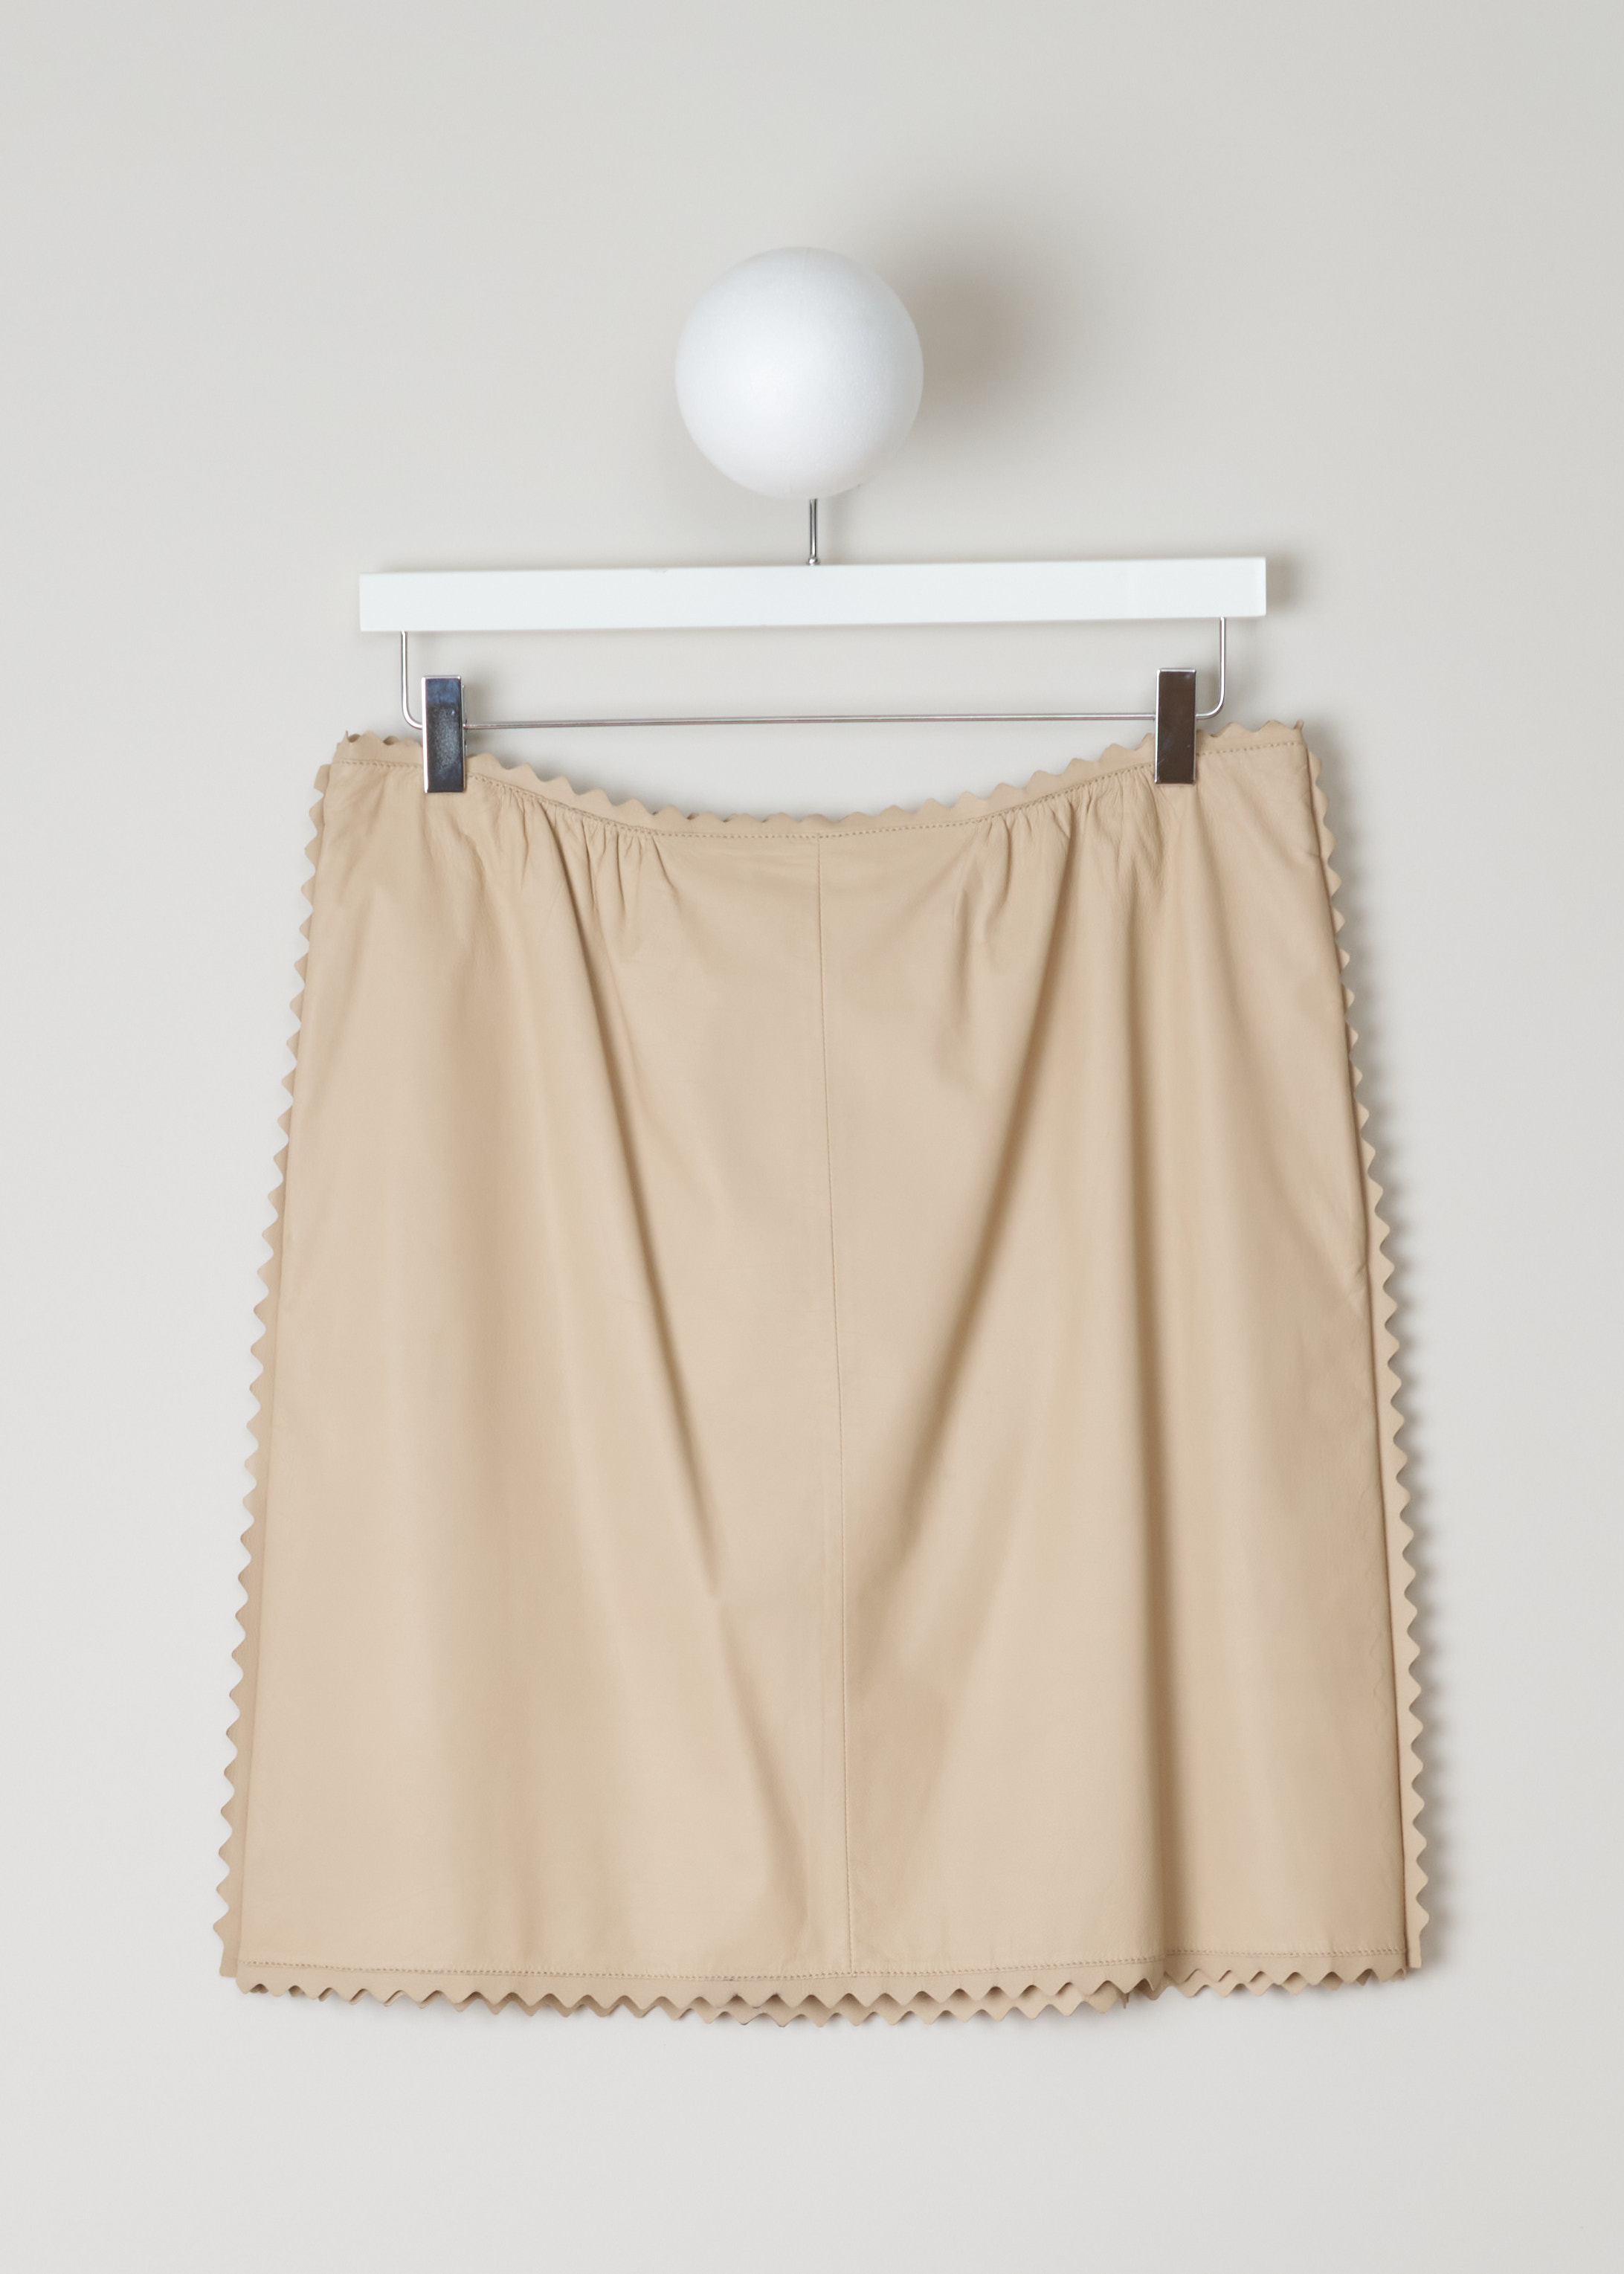 ChloÃ©, Beige leather skirt with frilled edges, 13SCJ03_13S204_ginger_beige, beige back. Calfskin crafted into a lovely skirt, coloured to a shade of beige, scalloped edges at hem, waist and side seam and. The fastening option can be found on the side seam.